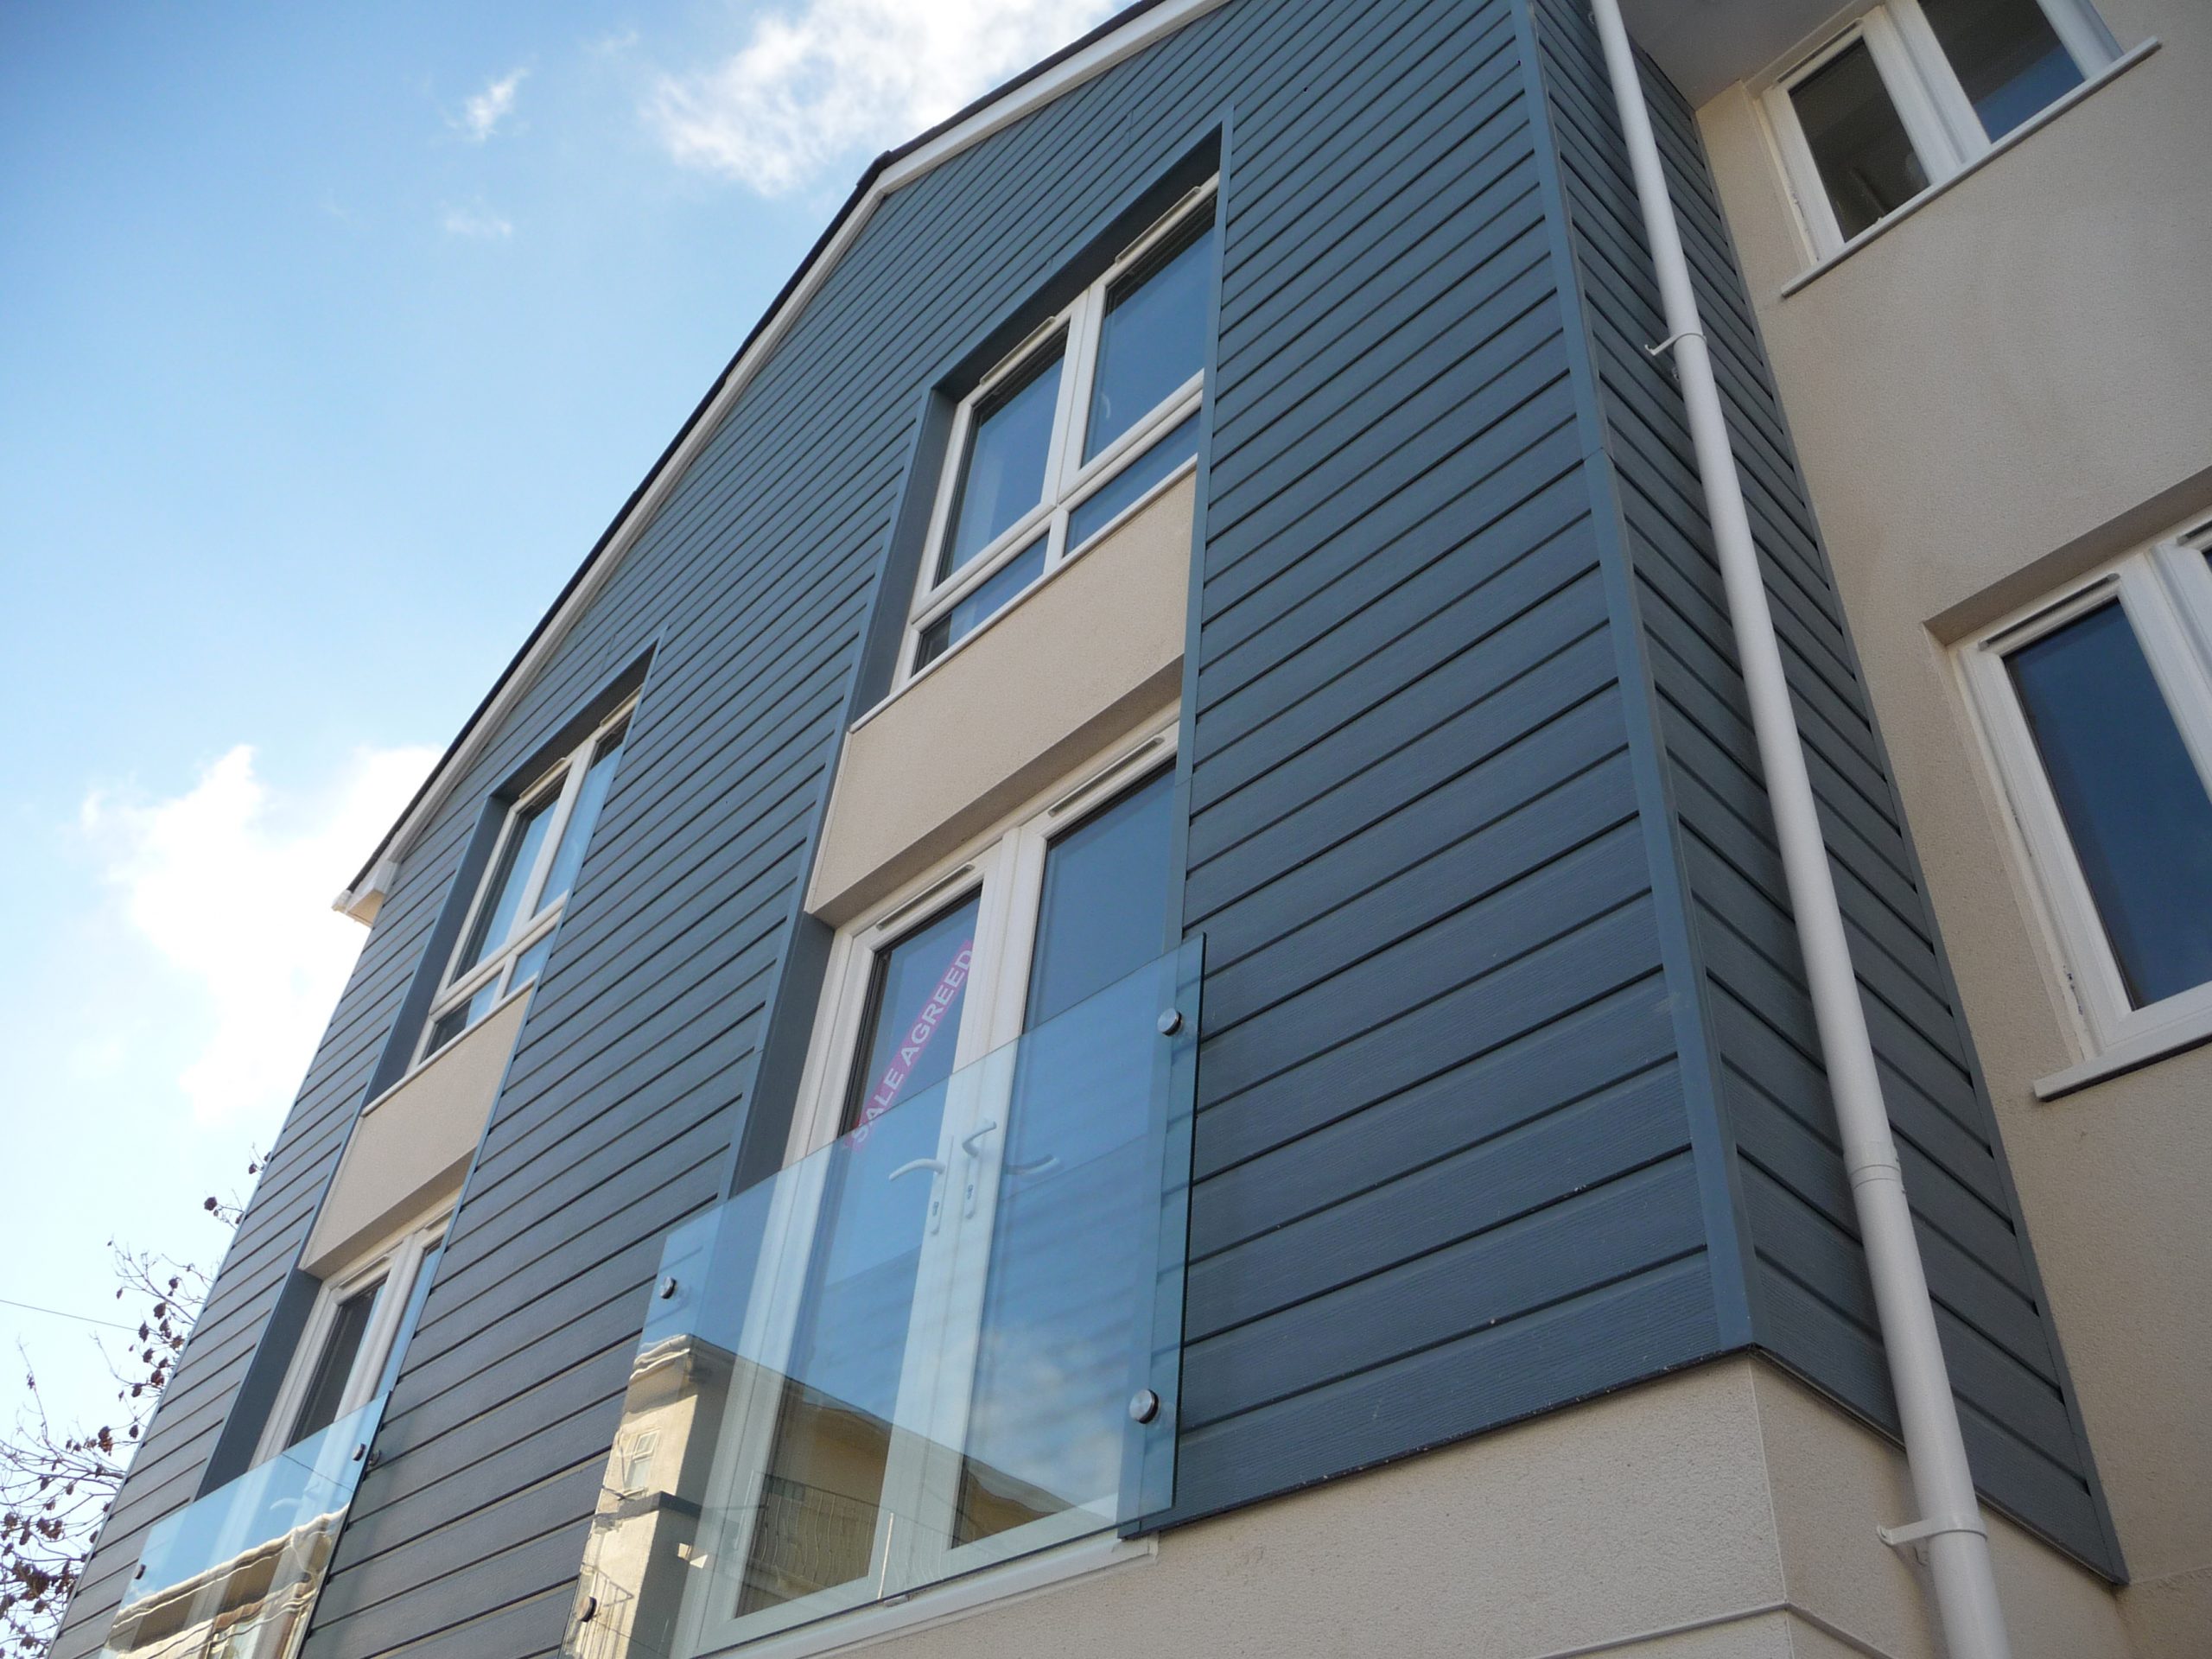 Featured image for “Comparing K-Rend And PVC-UE Cladding”